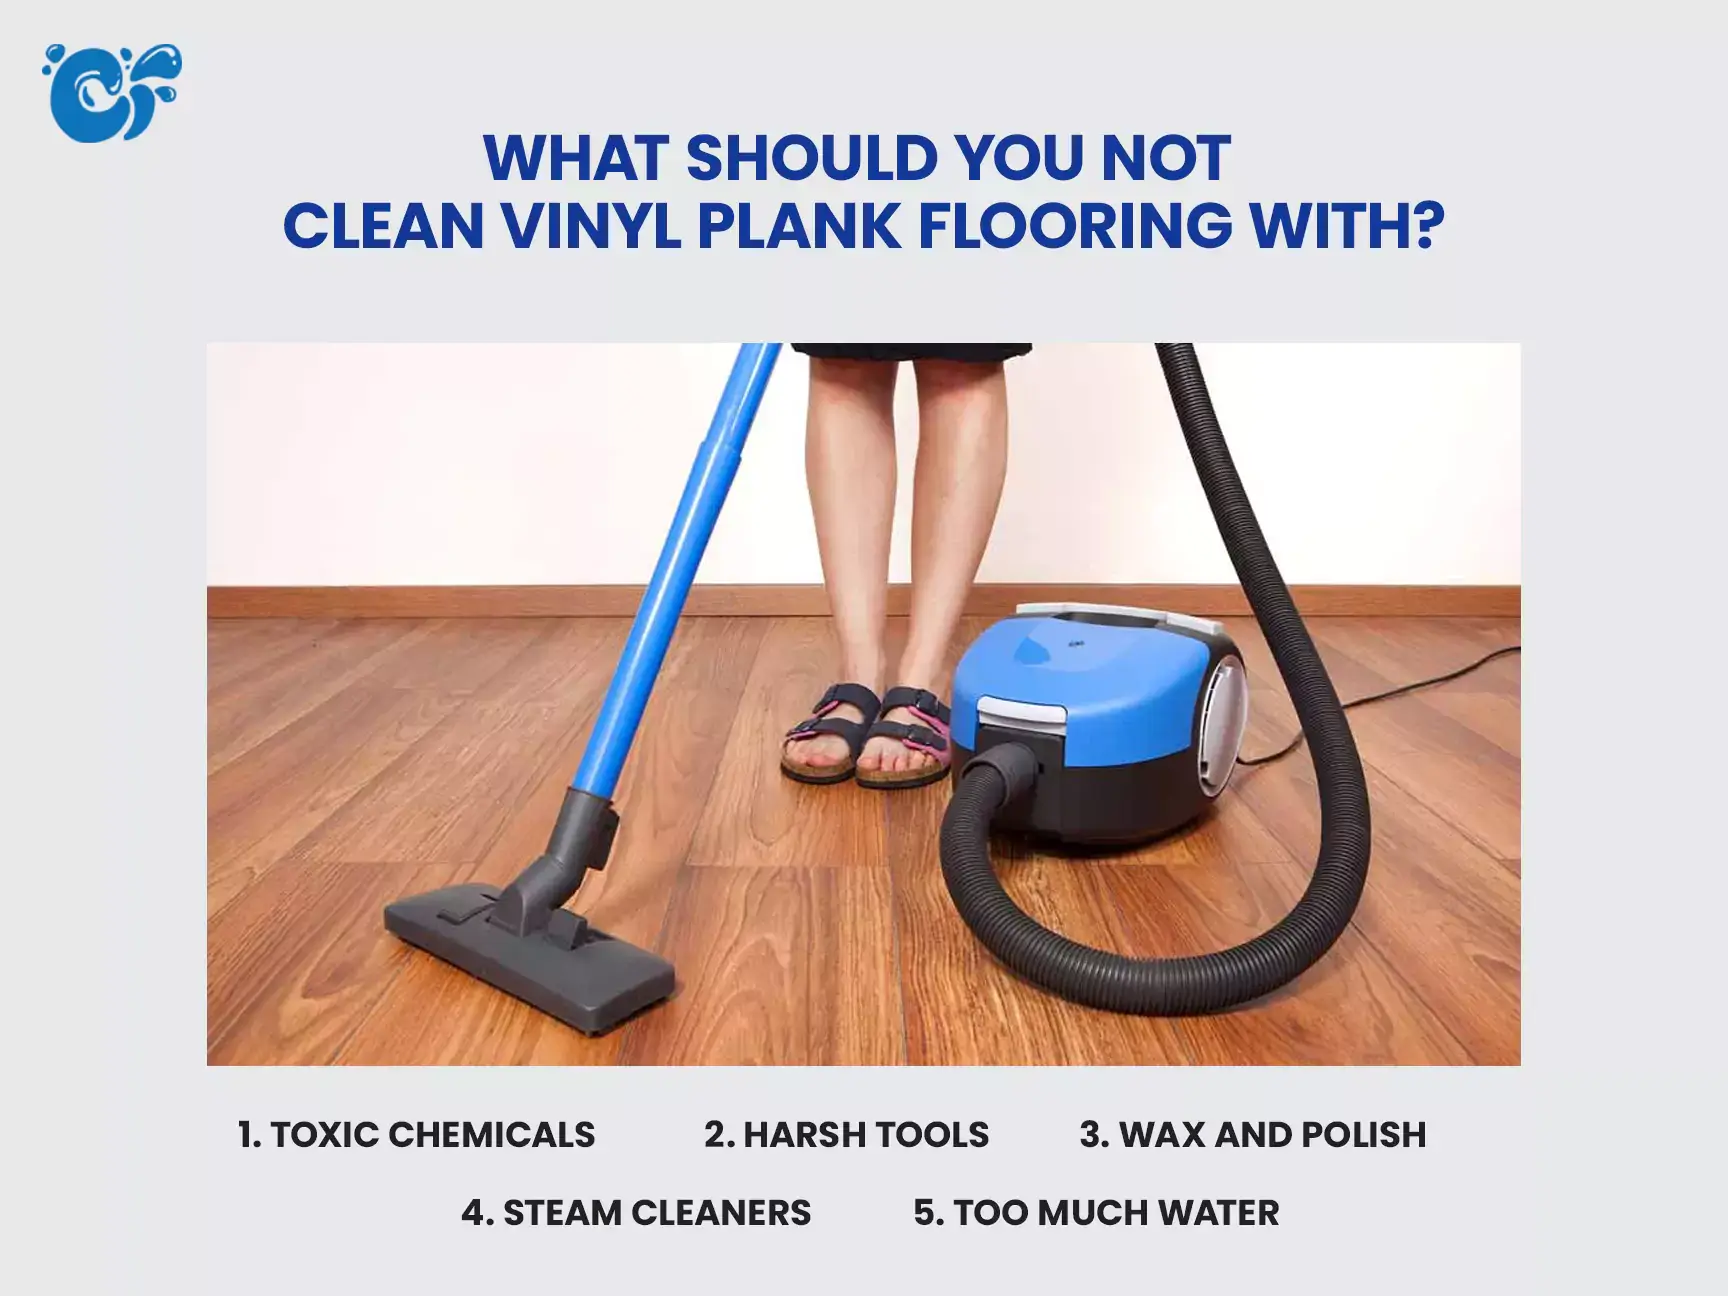 What Should You Not Clean Vinyl Plank Flooring With?